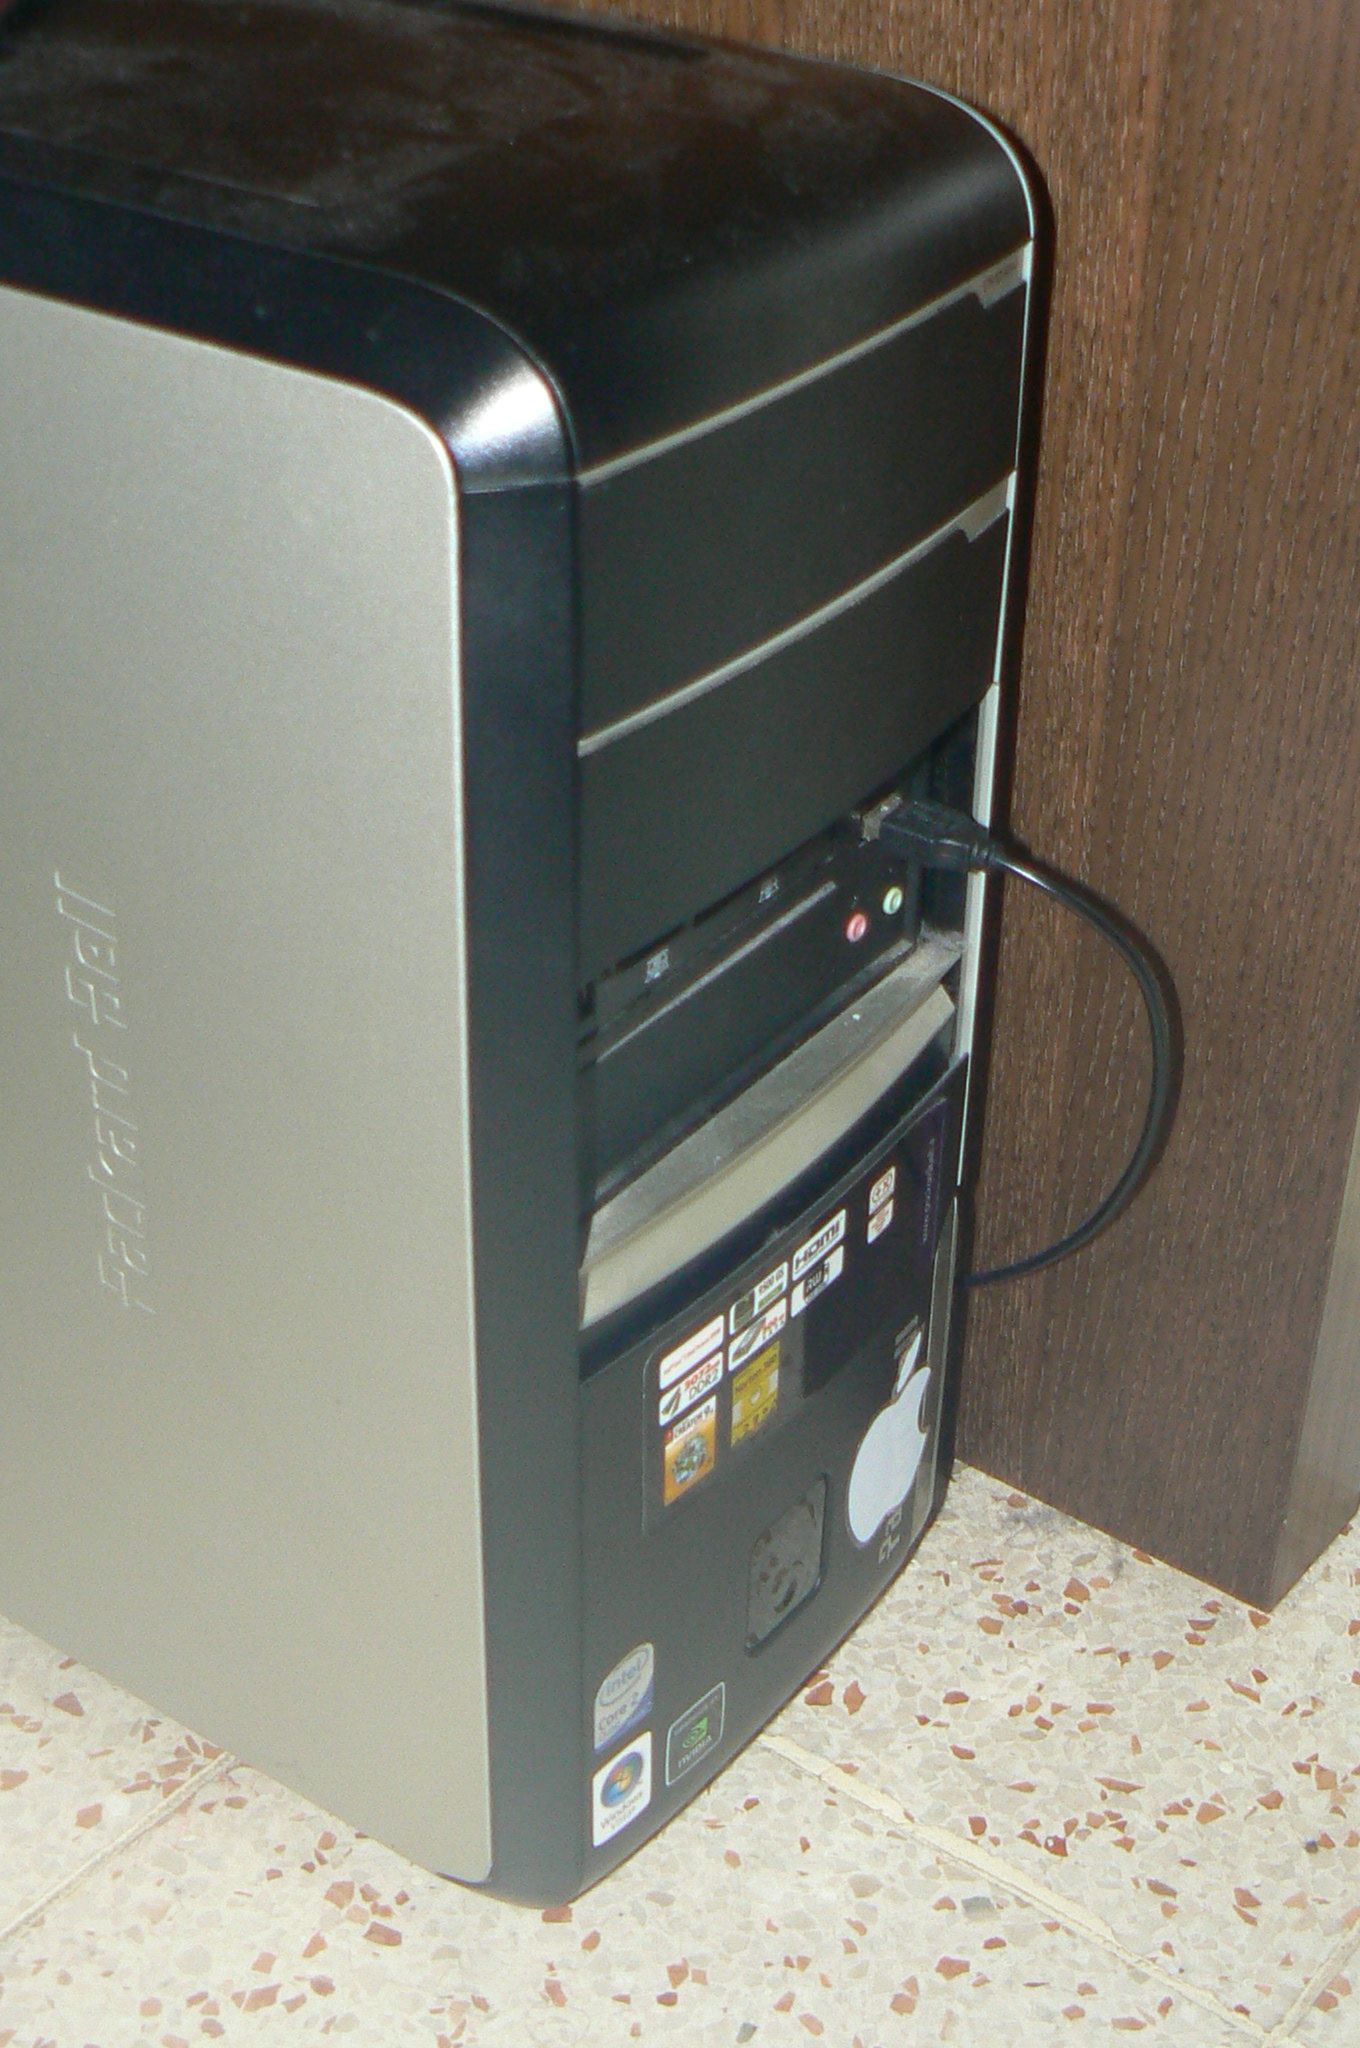 The front of the computer showing all the ports. The upper side is a bit dusty. There's an Apple sticker next to the power button.